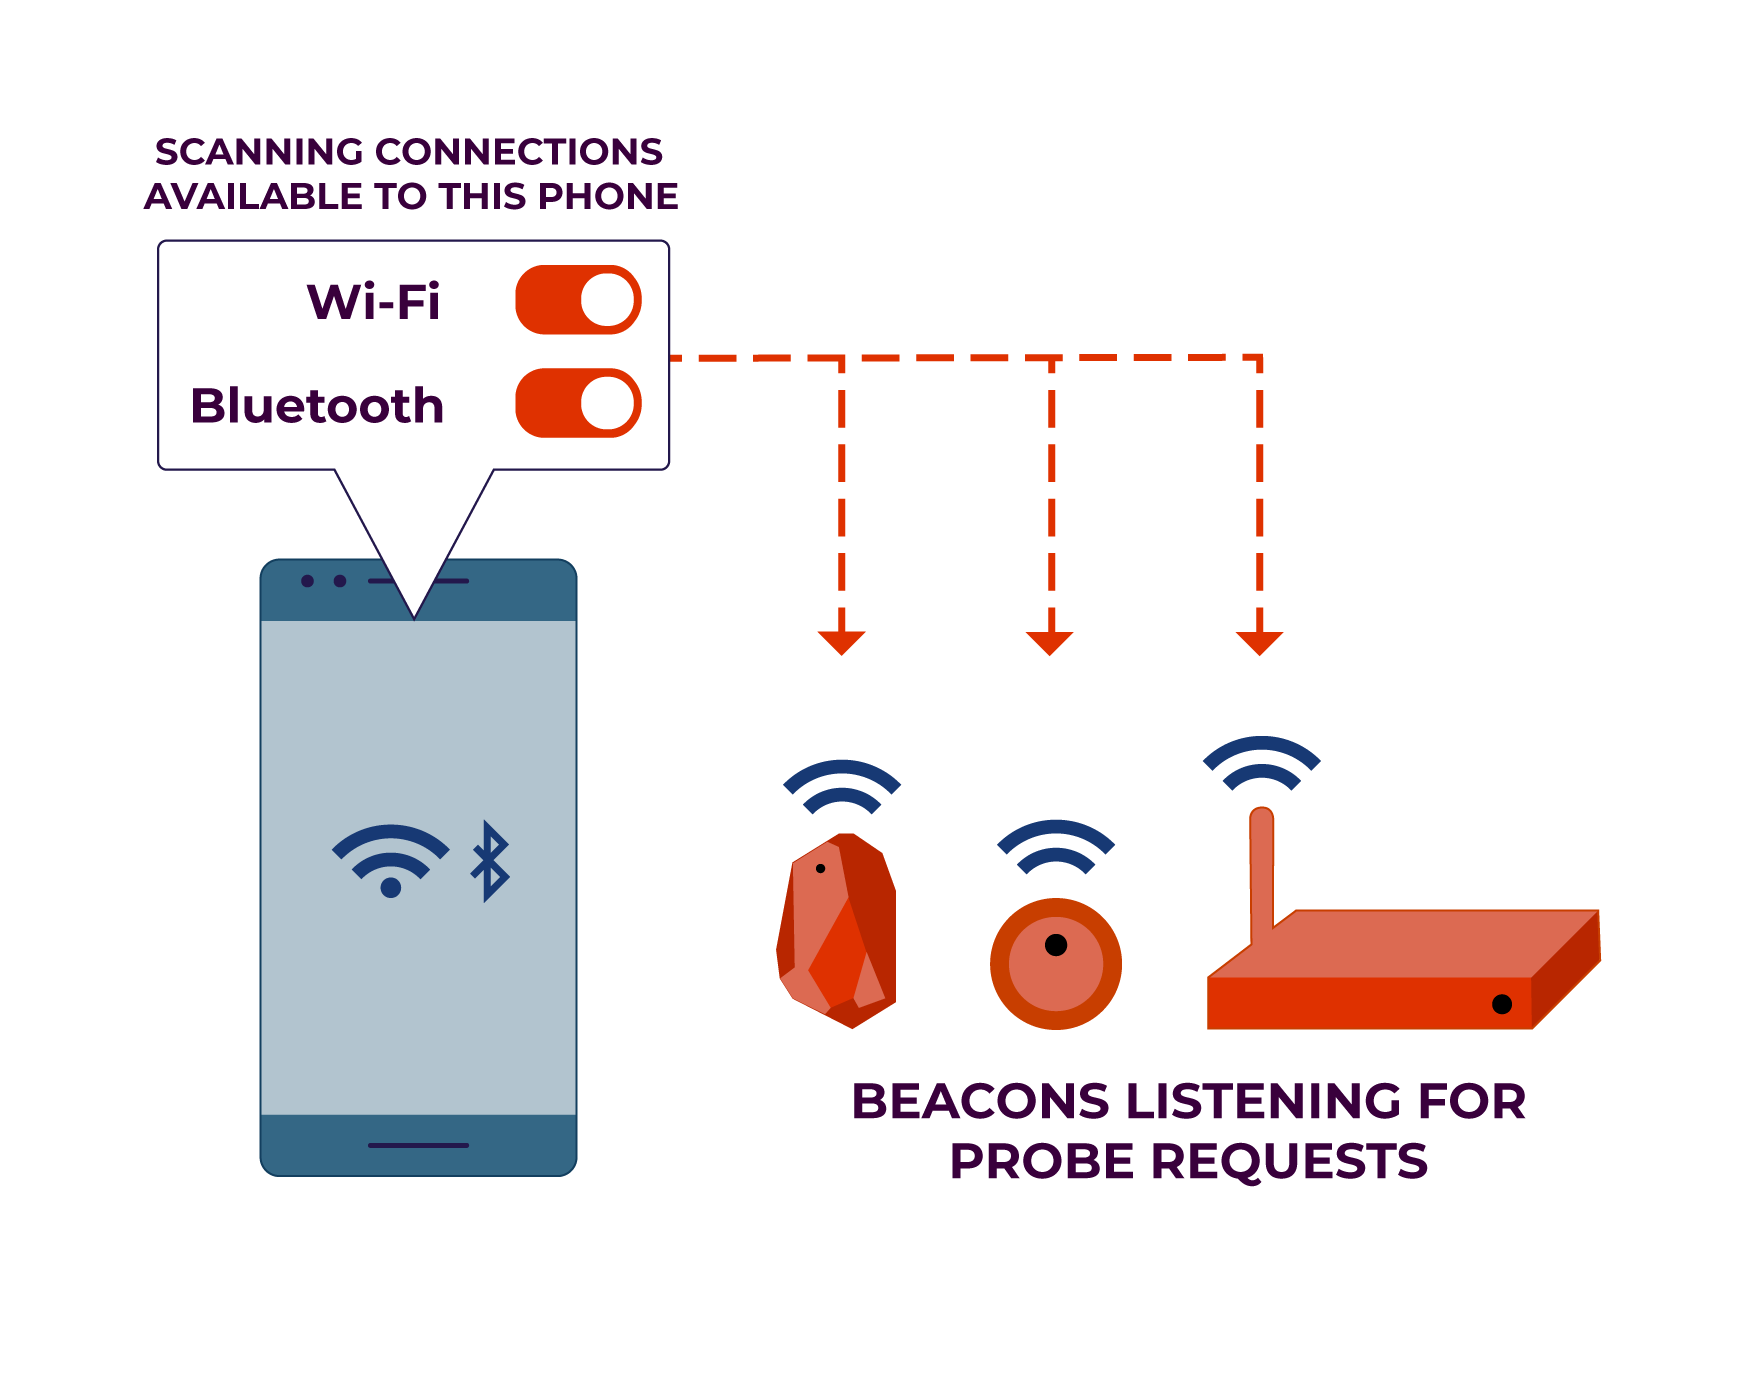 A smartphone emits probe request to scan for available WiFi and Bluetooth connections. Several wireless beacons listen passively to the requests.